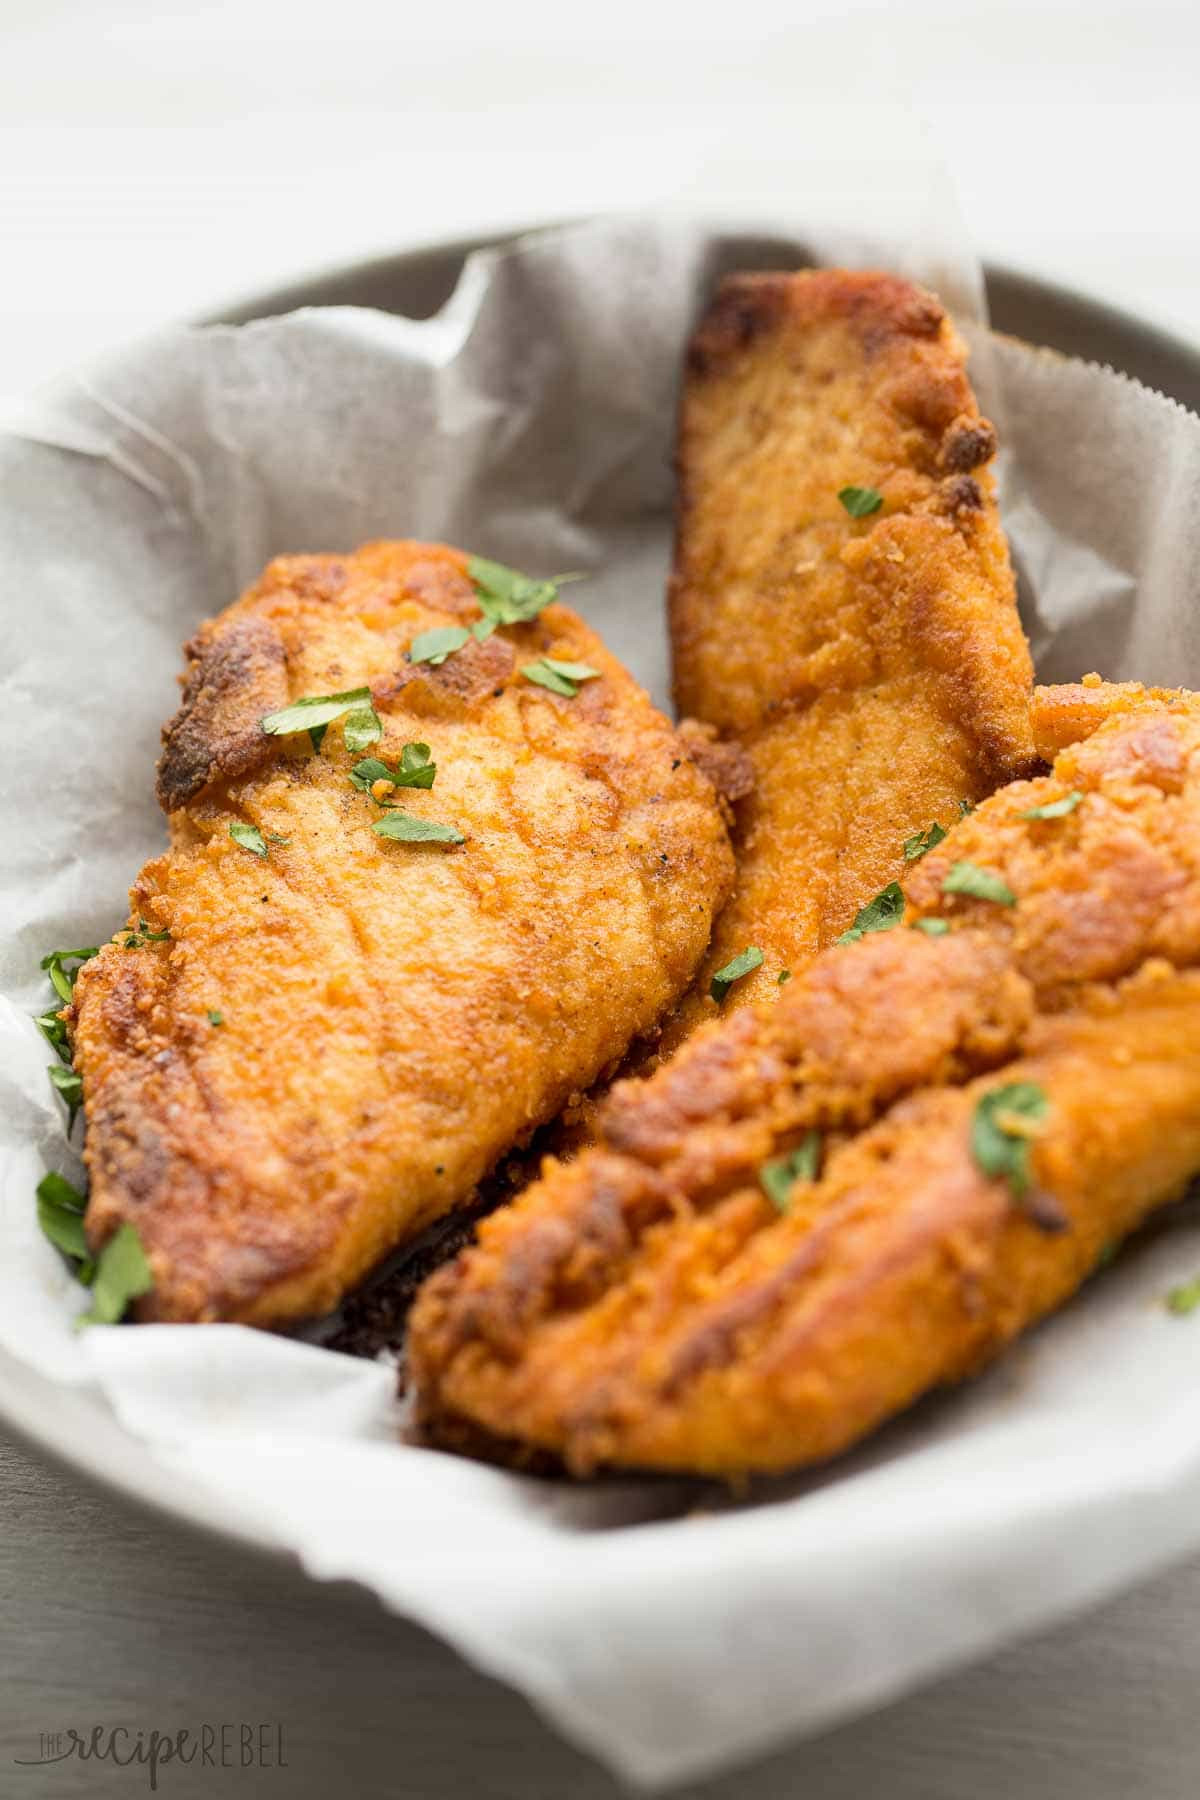 Oven Fried Chicken Recipes
 The BEST Oven Fried Chicken Recipe Baked Fried Chicken